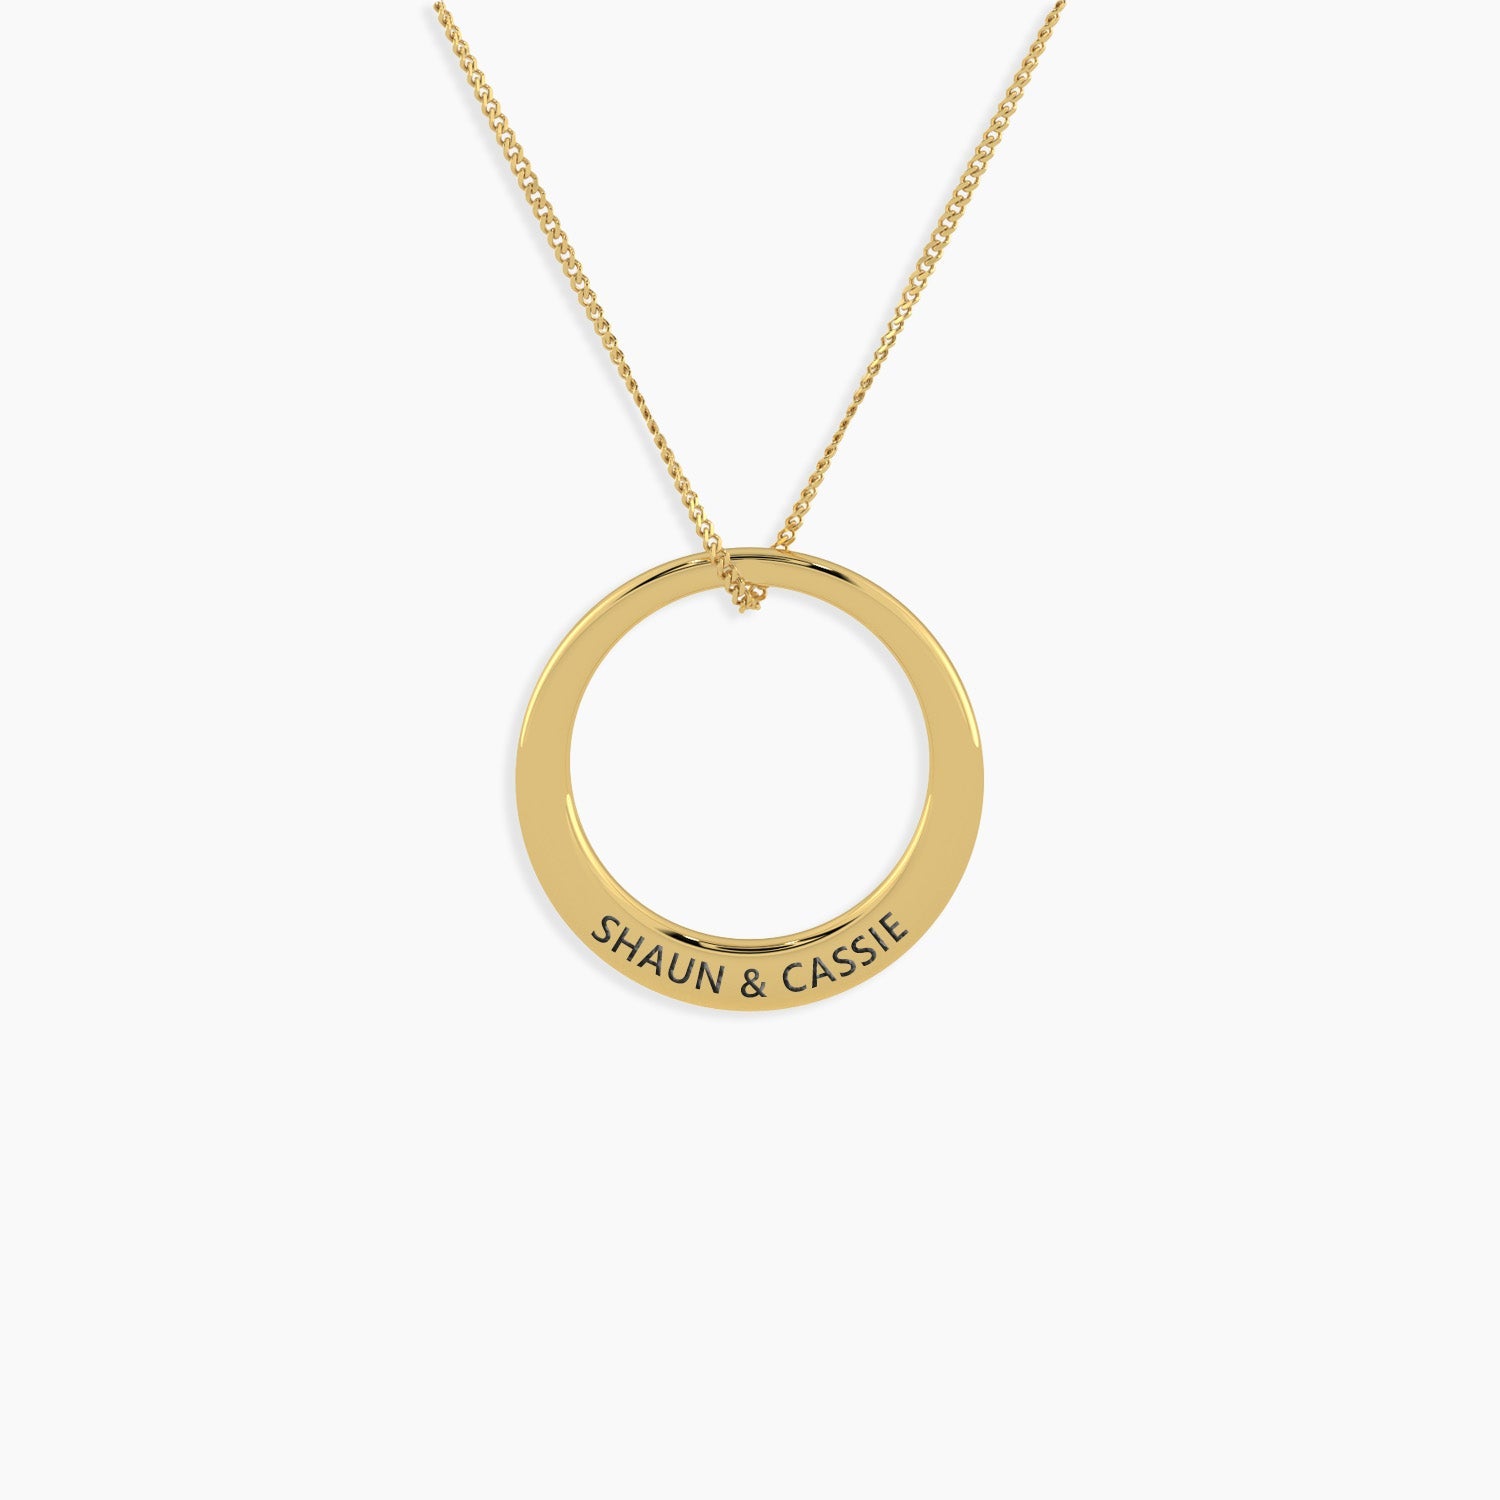 Front view of the Circle of Serenity Small Pendant, showcasing its disc-shaped design, rhodium and gold plating, and custom name engraving, making it the ideal gift for her in Australia.